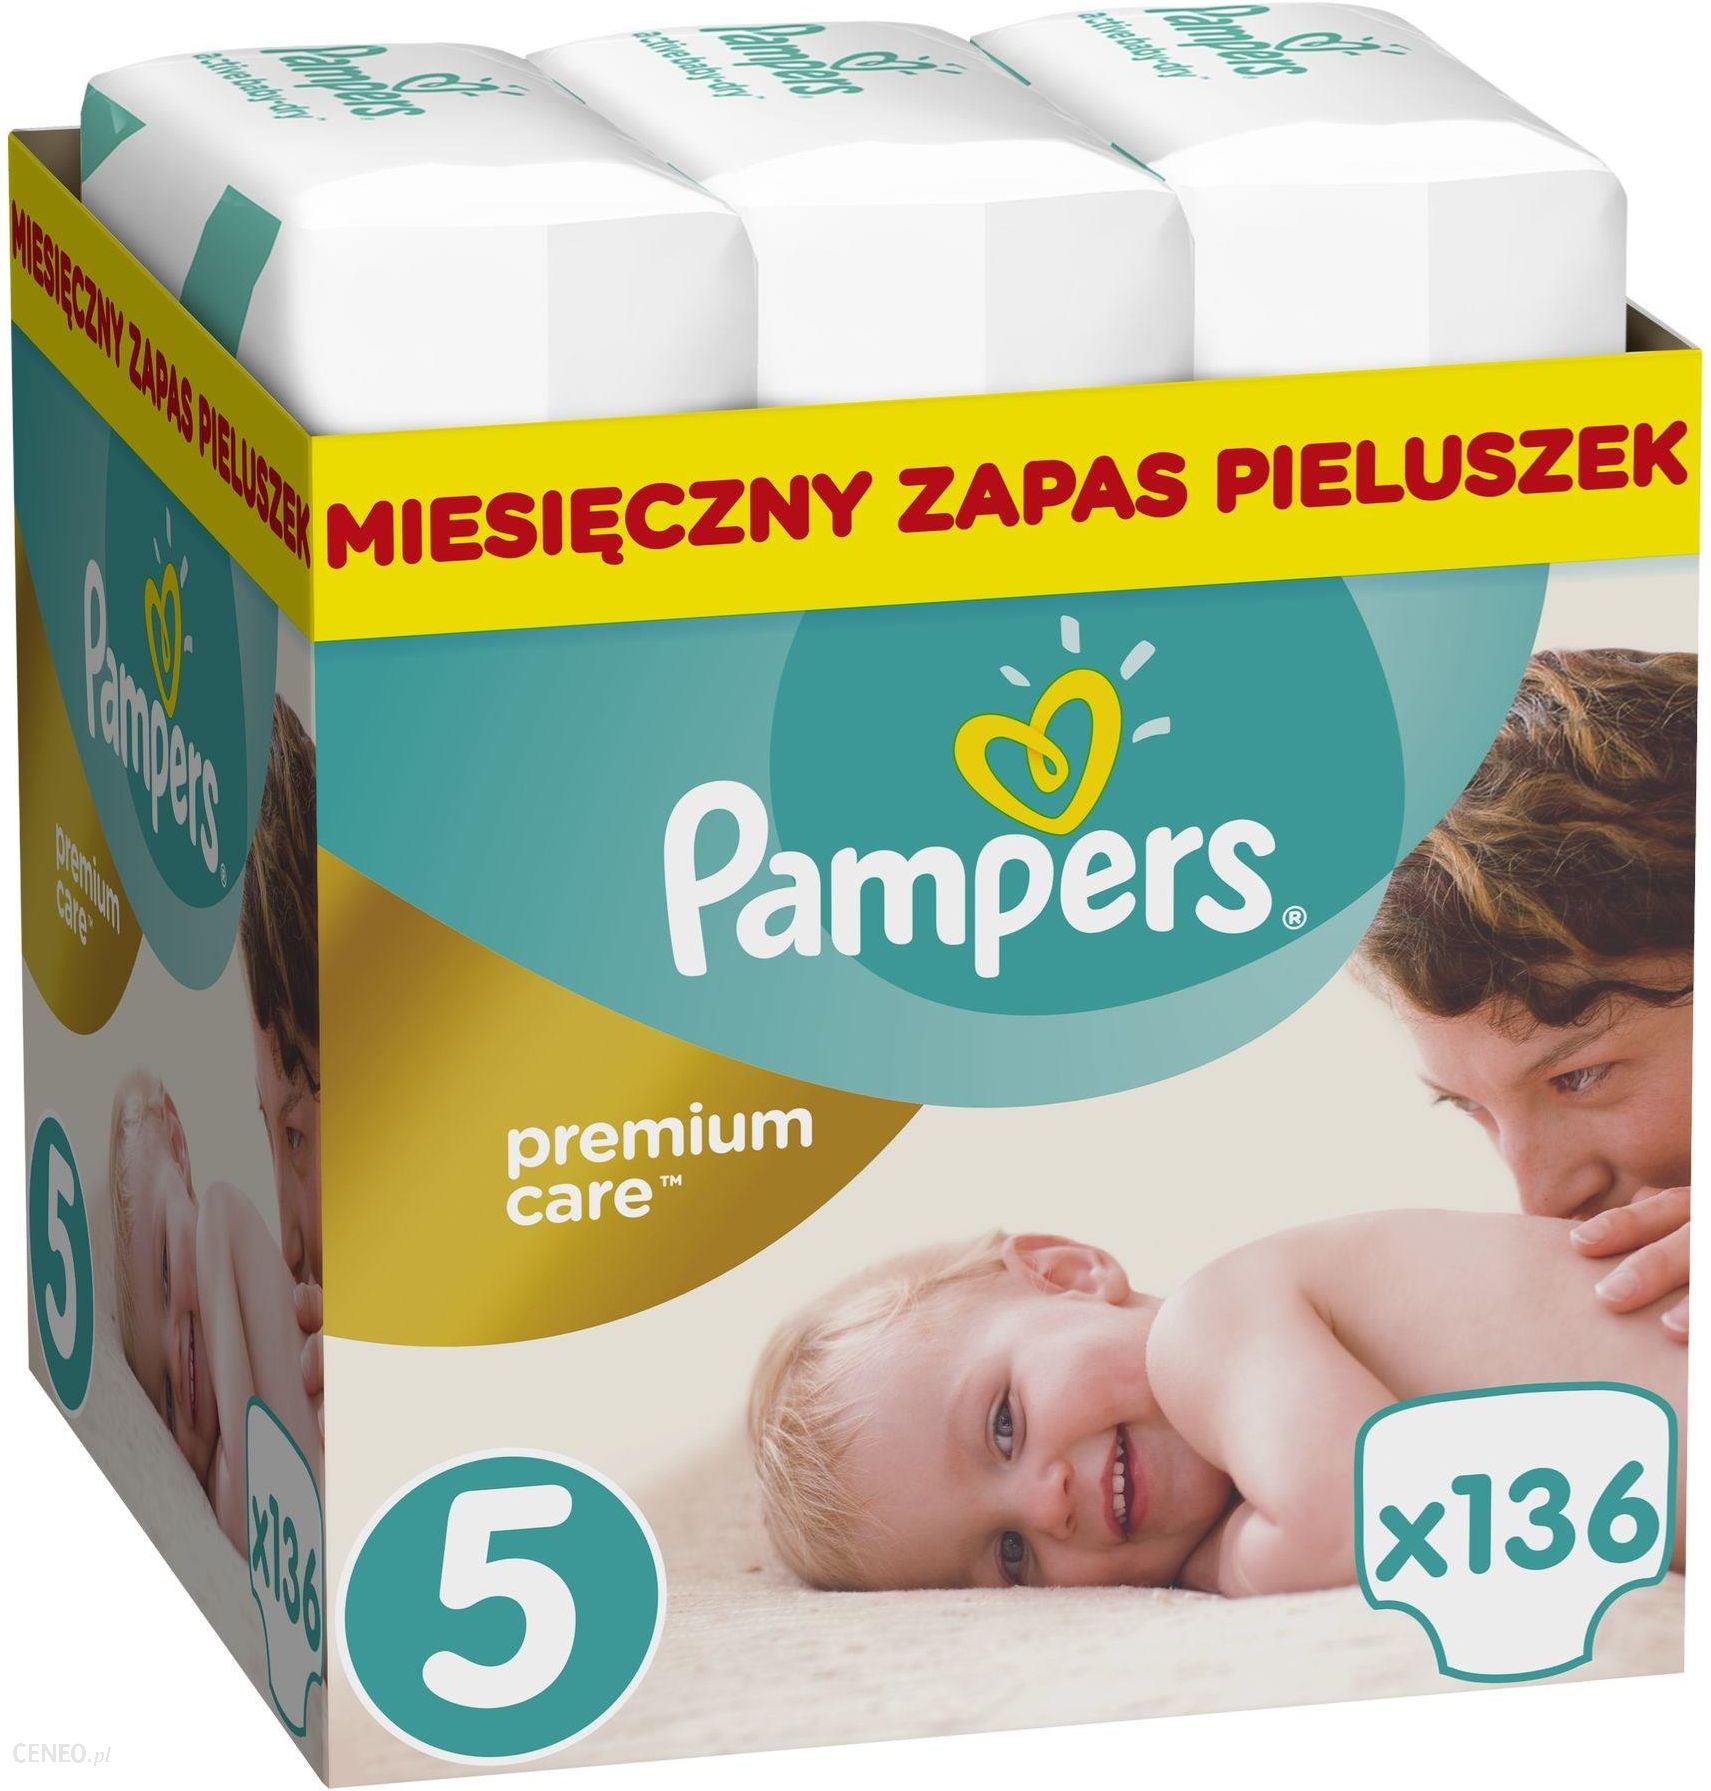 premium protection pampers 1